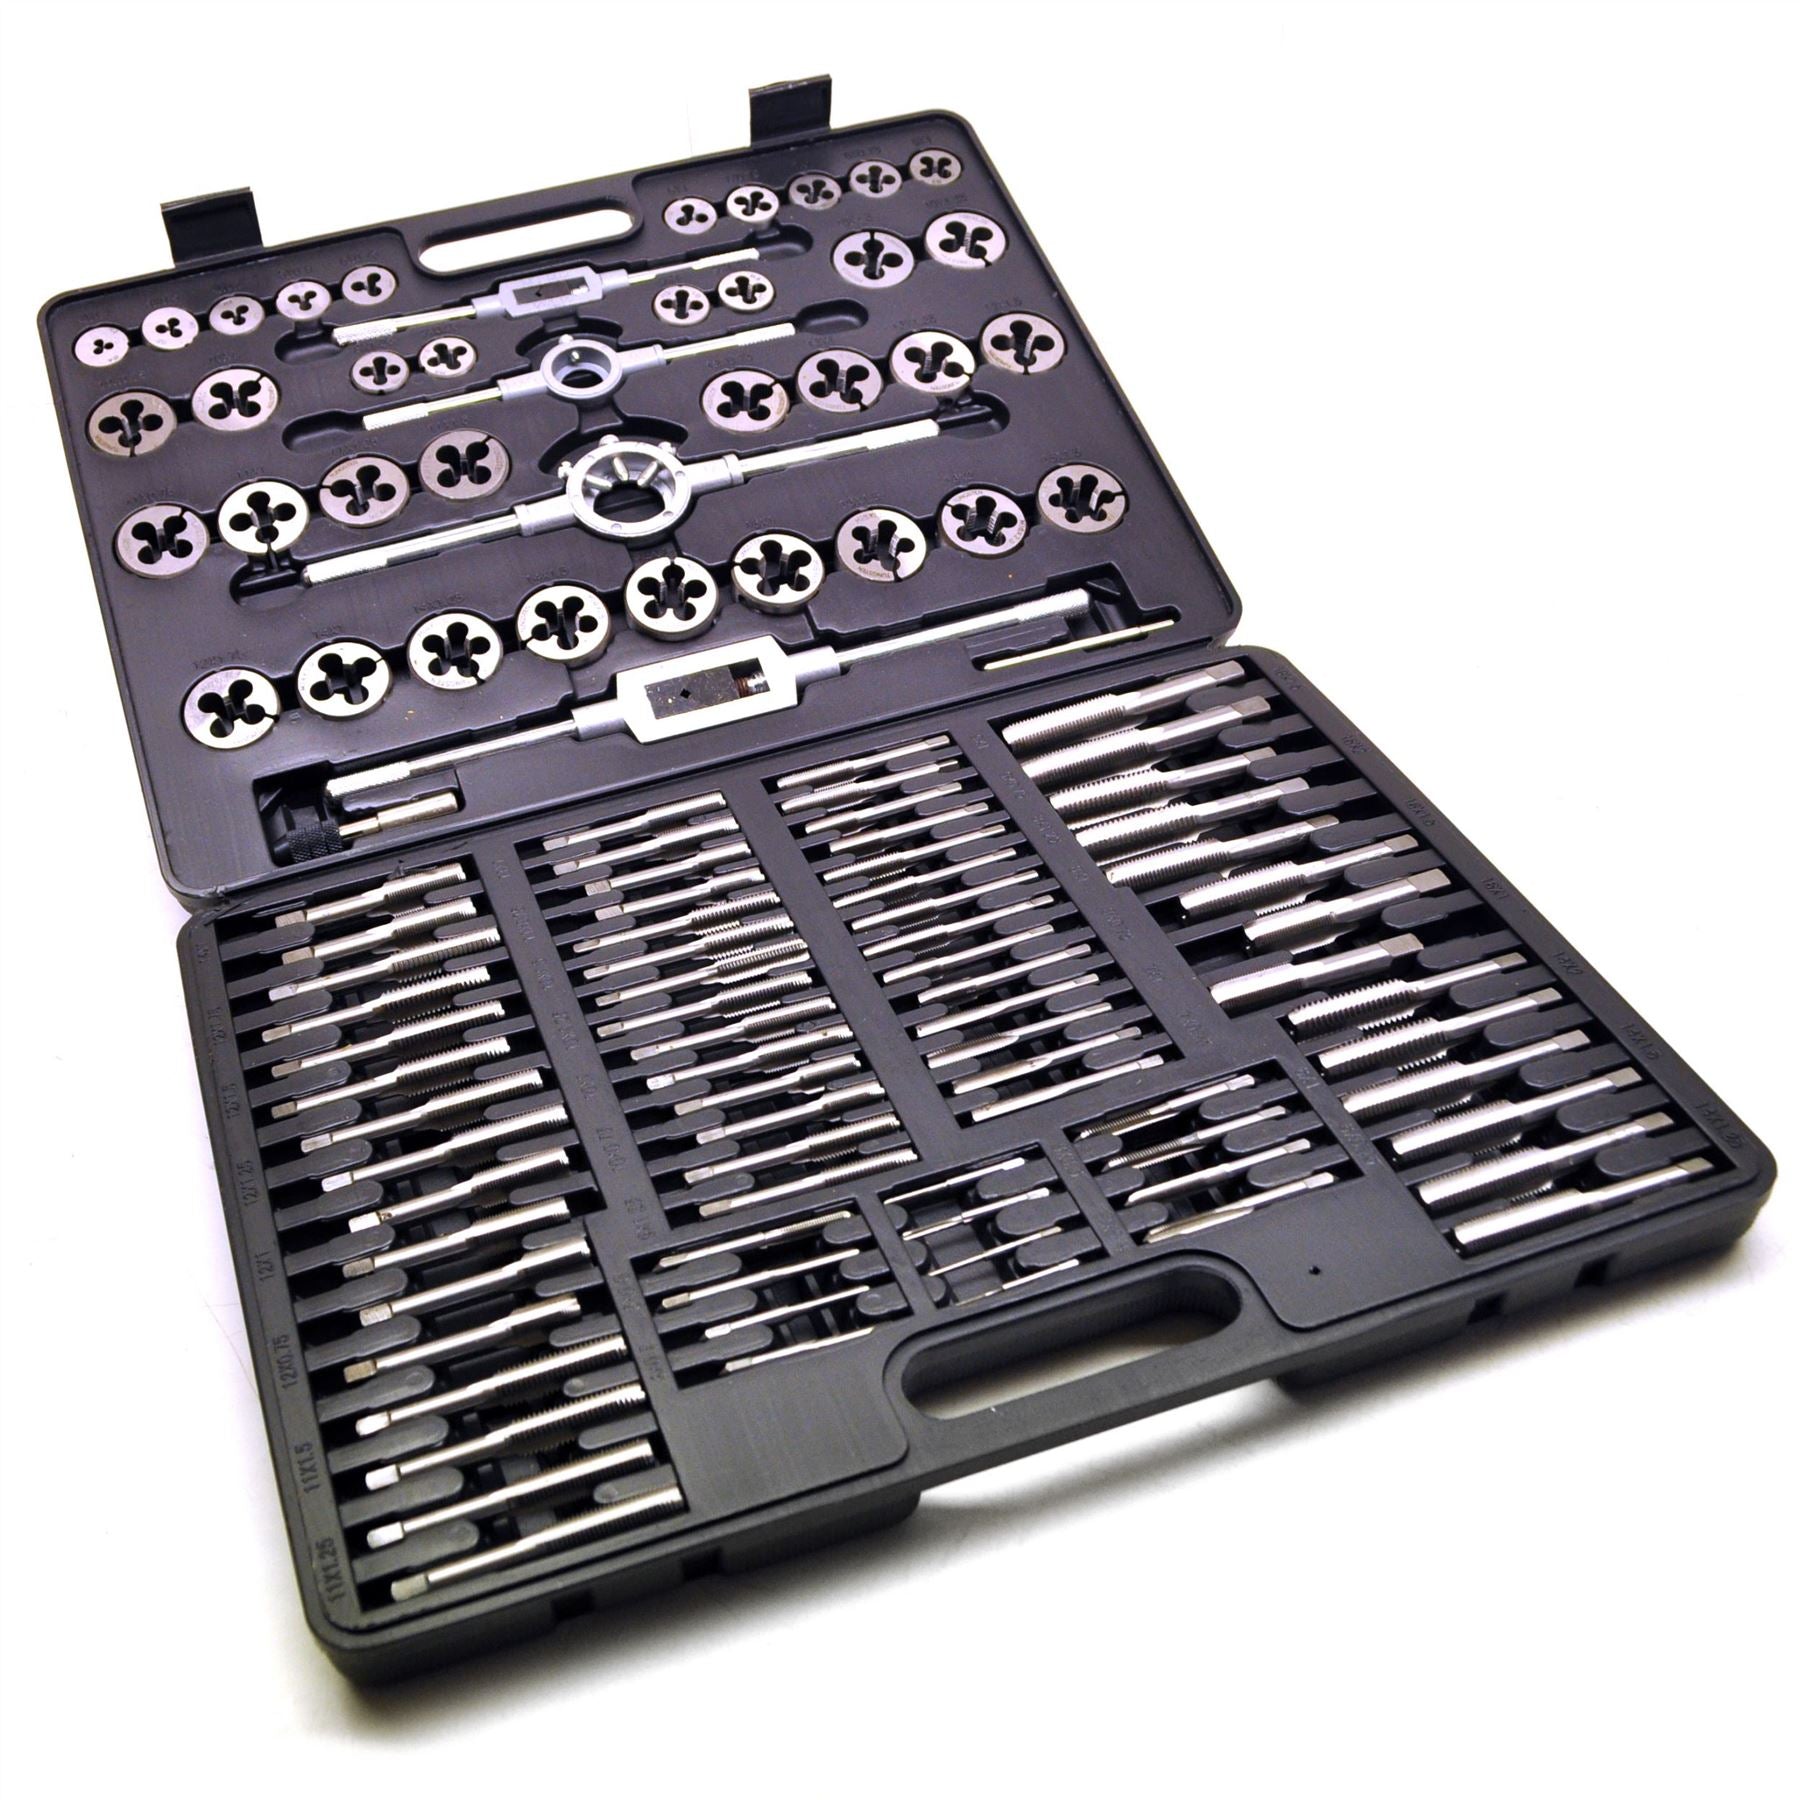 Metric tap and die set by US Pro 110pc (Tungsten) AT226